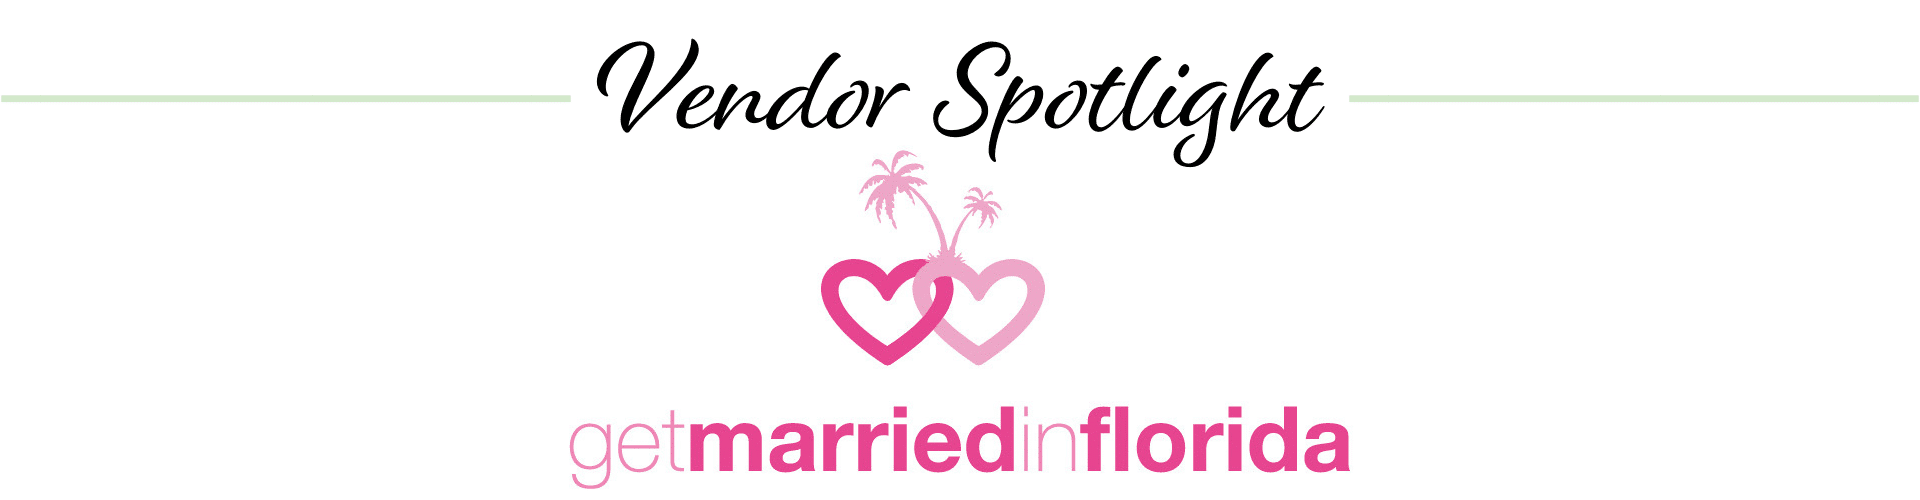 Get Married in Florida logo